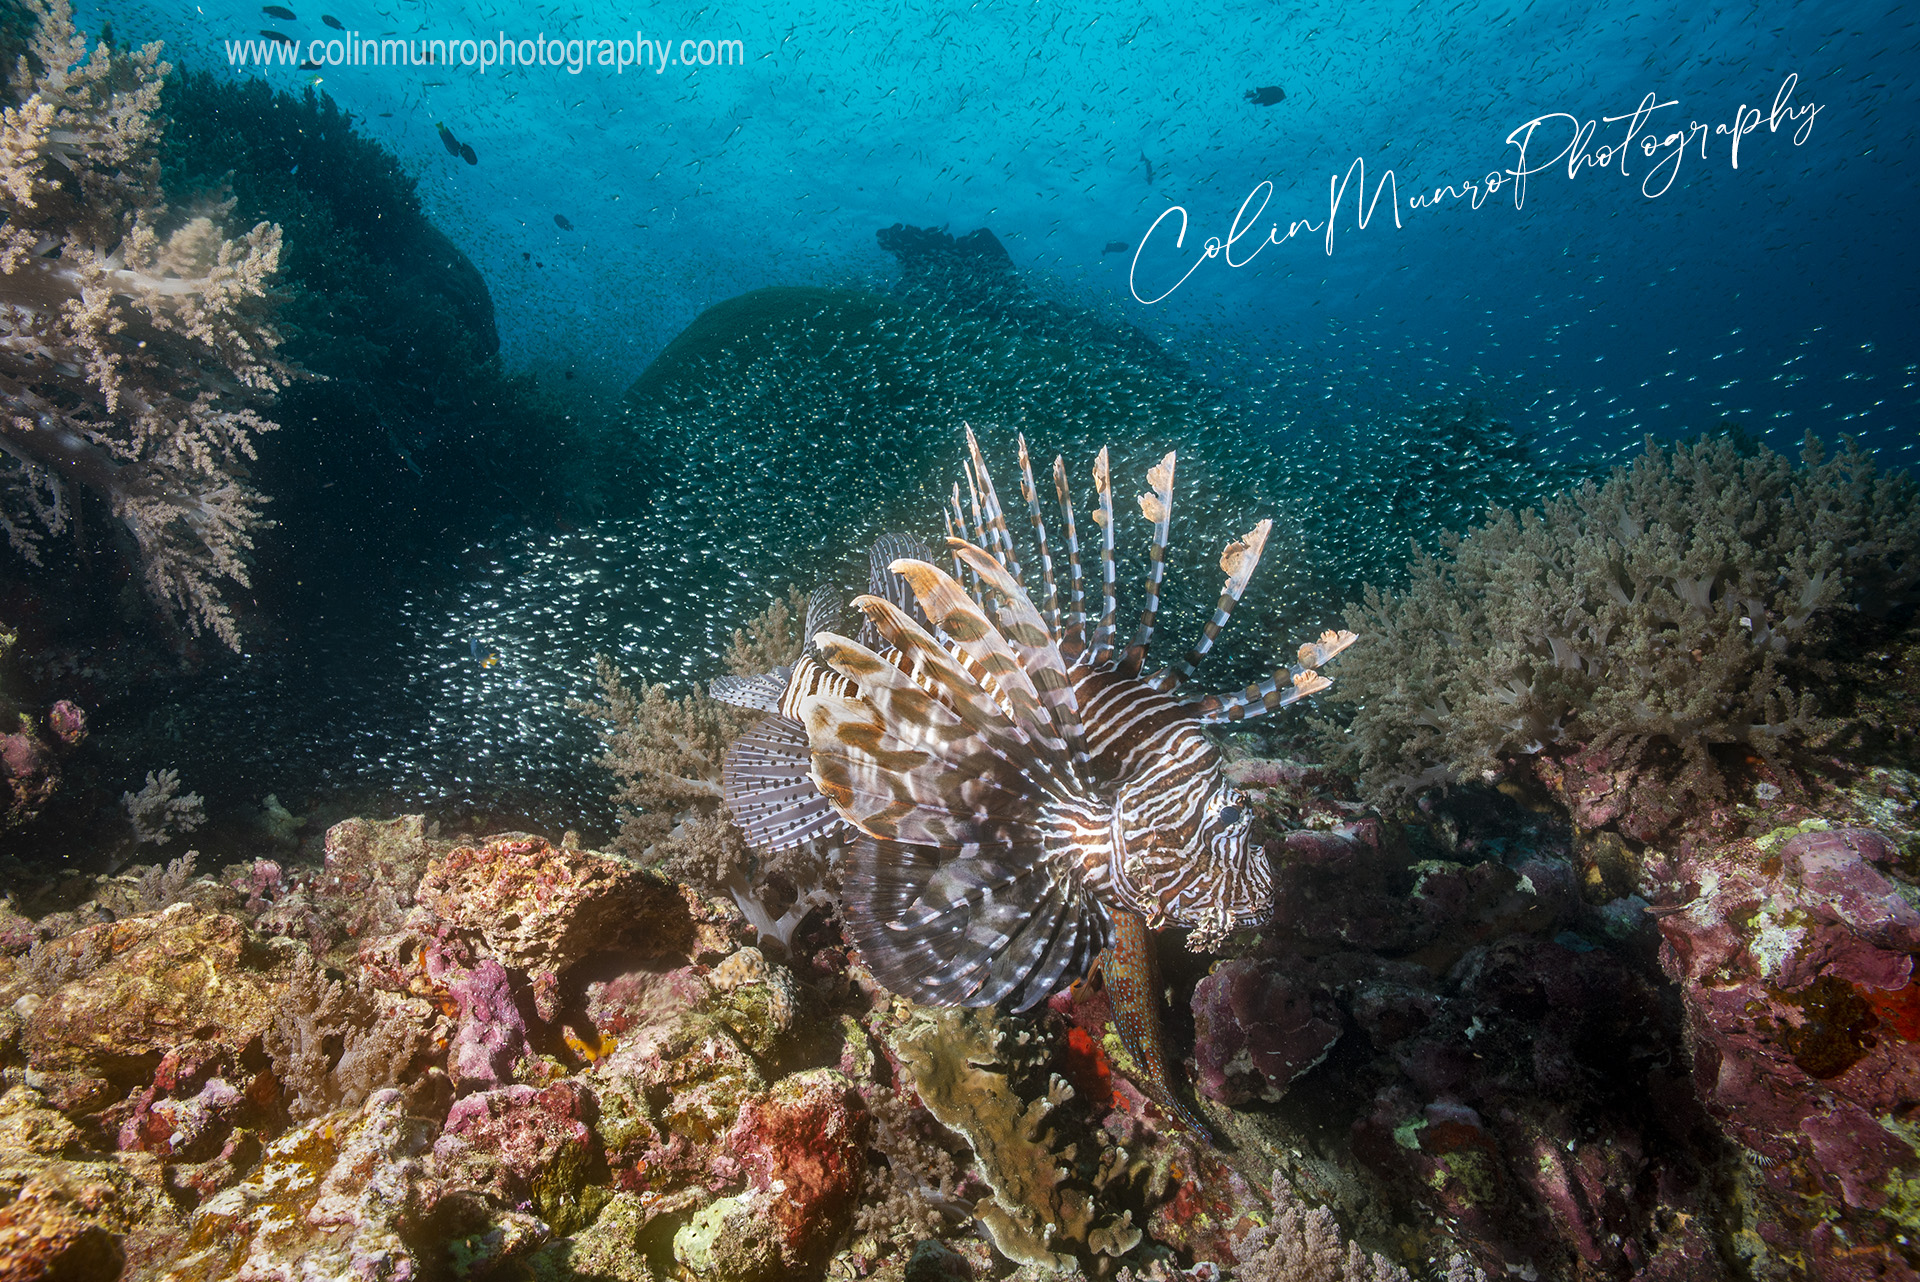 An Indian lionfish, Pterios miles, surrounded by a shool of tiny fish, swims across a coral reef, Richelieu Rock, Surin Islands, Andaman Sea, Thailand. Fine art print. Underwater wildlife prints @ Colin Munro Photography 